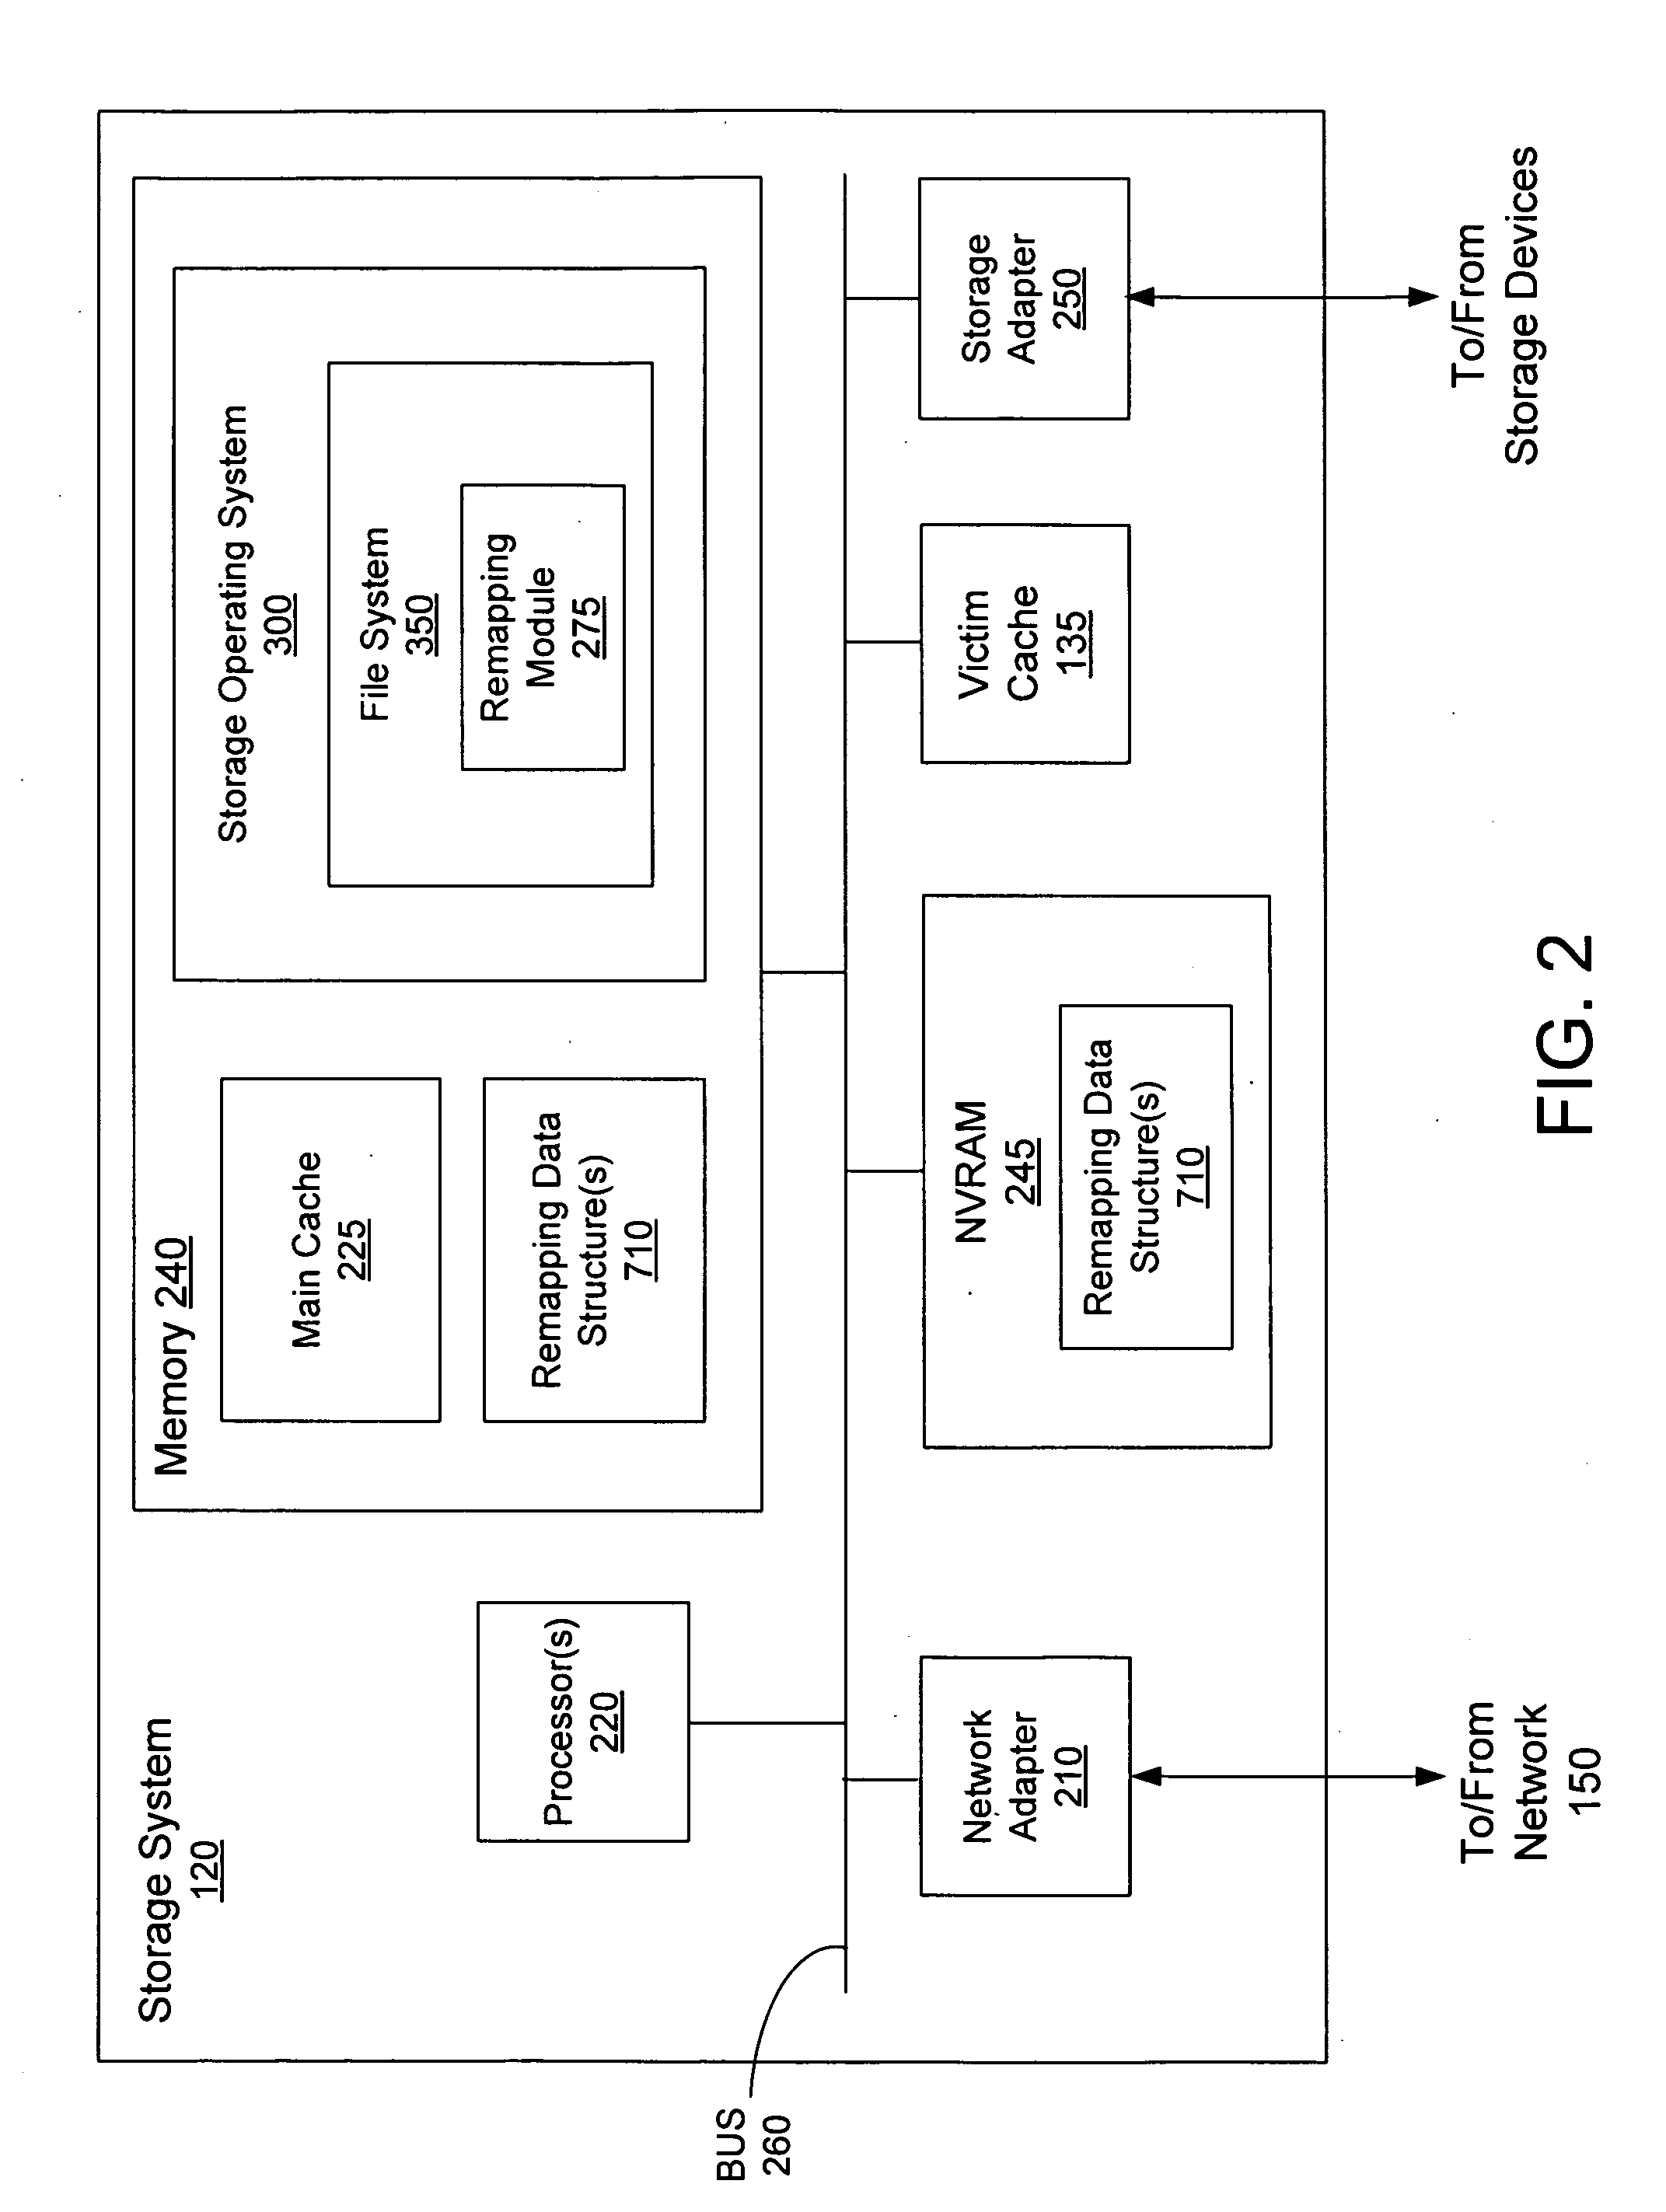 Remapping of Data Addresses for a Large Capacity Victim Cache